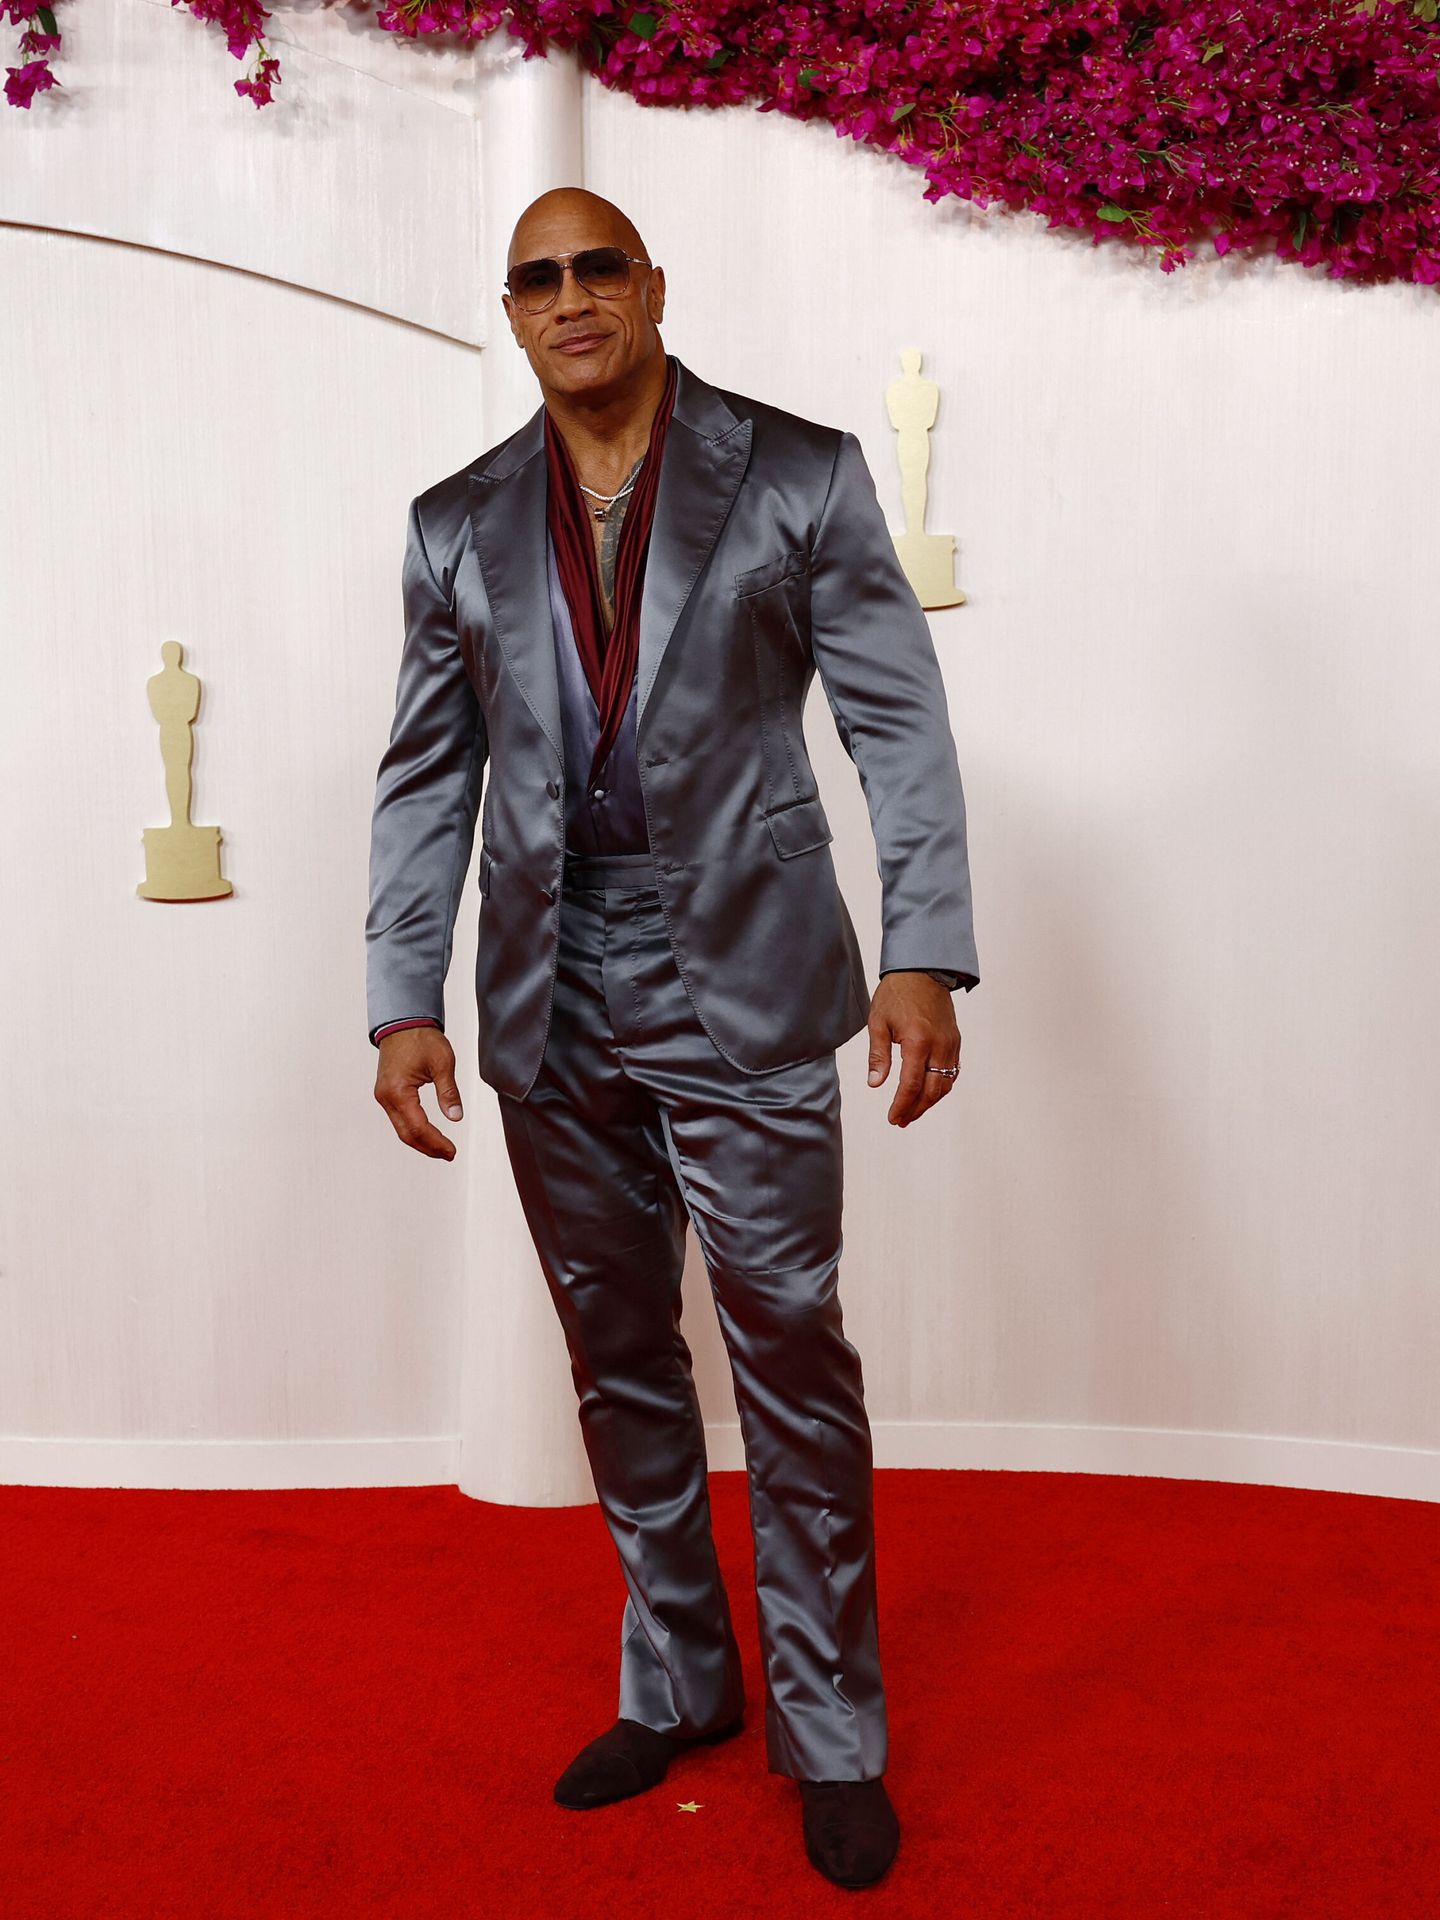 Dwayne Johnson poses on the red carpet during the Oscars arrivals at the 96th Academy Awards in Hollywood, Los Angeles, California, U.S., March 10, 2024. REUTERS Sarah Meyssonnier